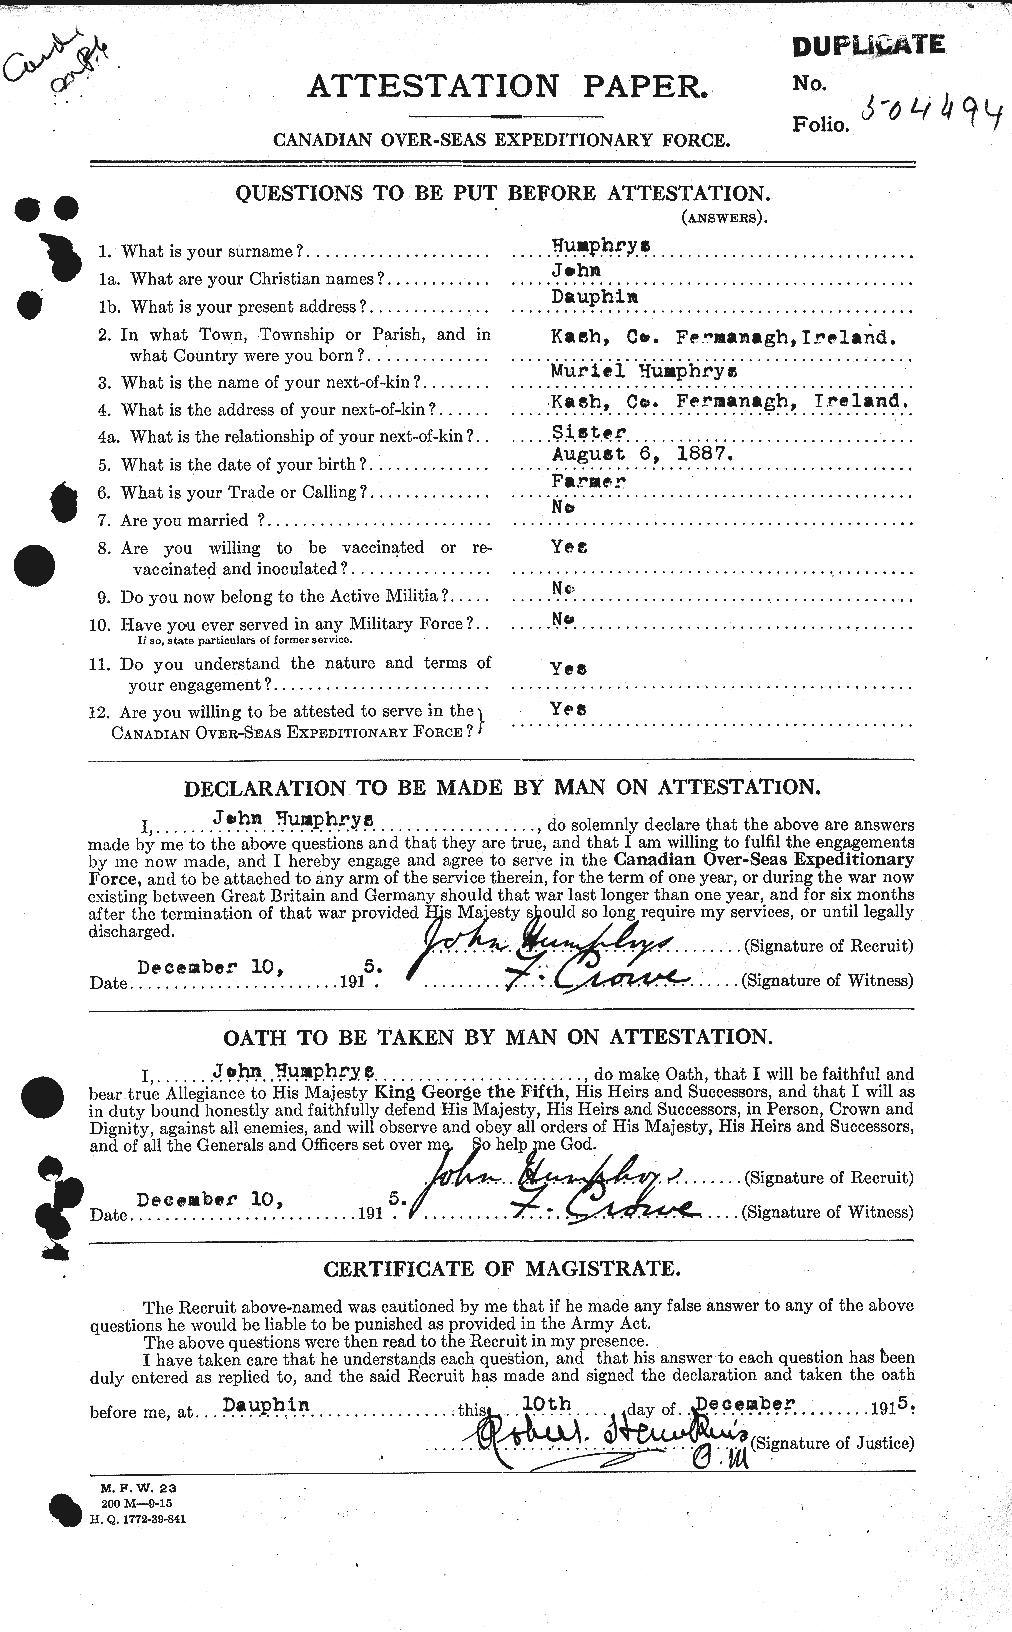 Personnel Records of the First World War - CEF 409659a